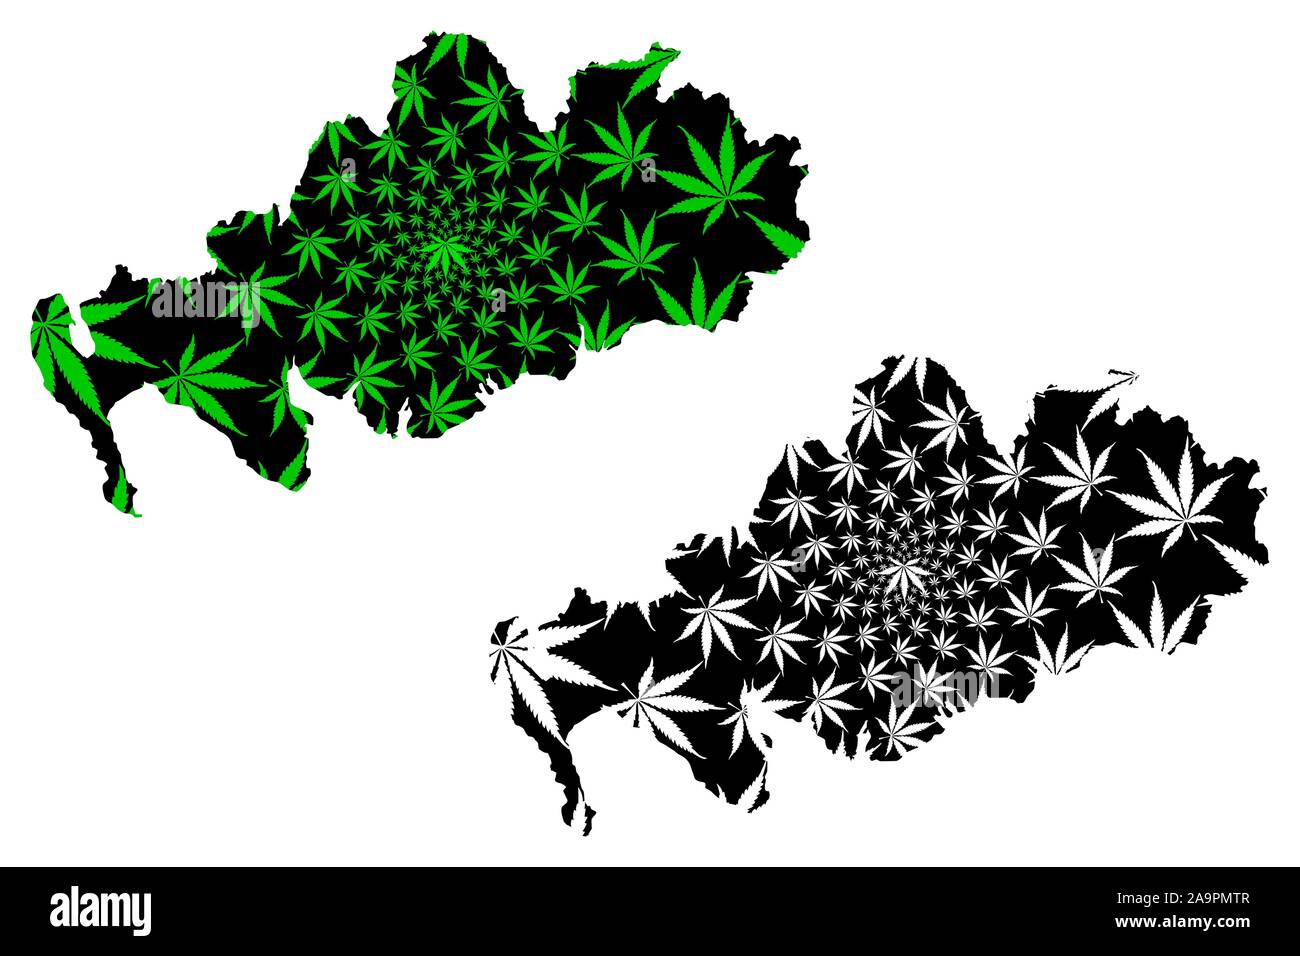 Dumfries and Galloway (United Kingdom, Scotland, Local government in Scotland) map is designed cannabis leaf green and black, Dumfries and Galloway ma Stock Vector